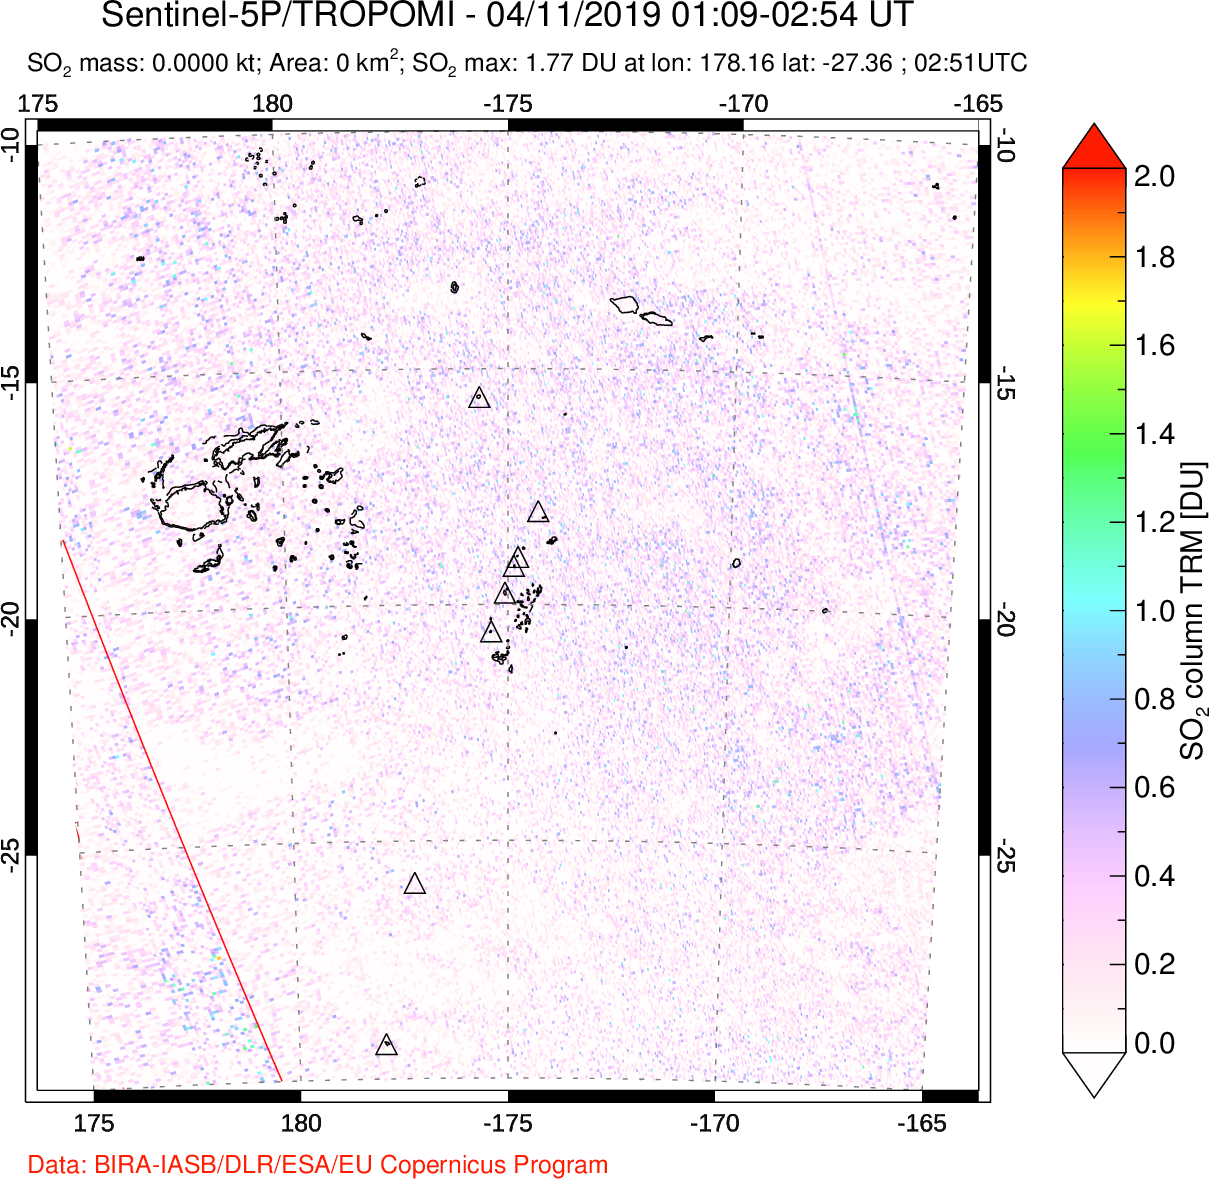 A sulfur dioxide image over Tonga, South Pacific on Apr 11, 2019.